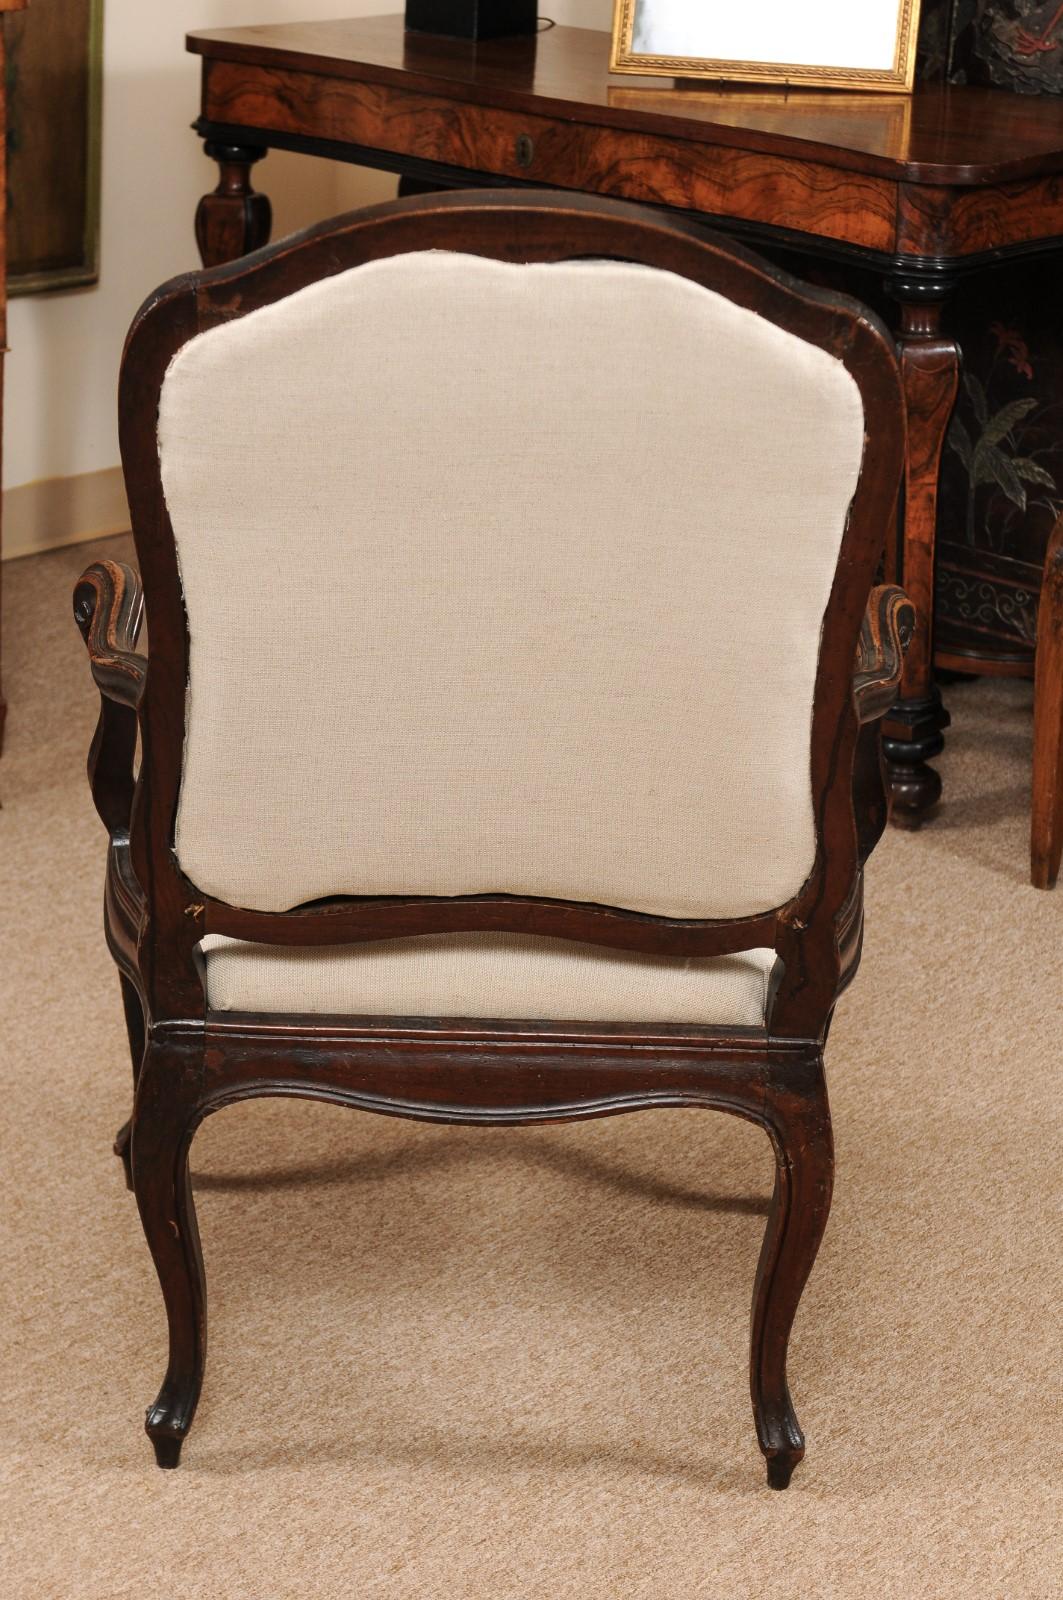 Pair of Rococo Period Walnut Armchairs, Genova, Italy Mid-18th Century For Sale 6